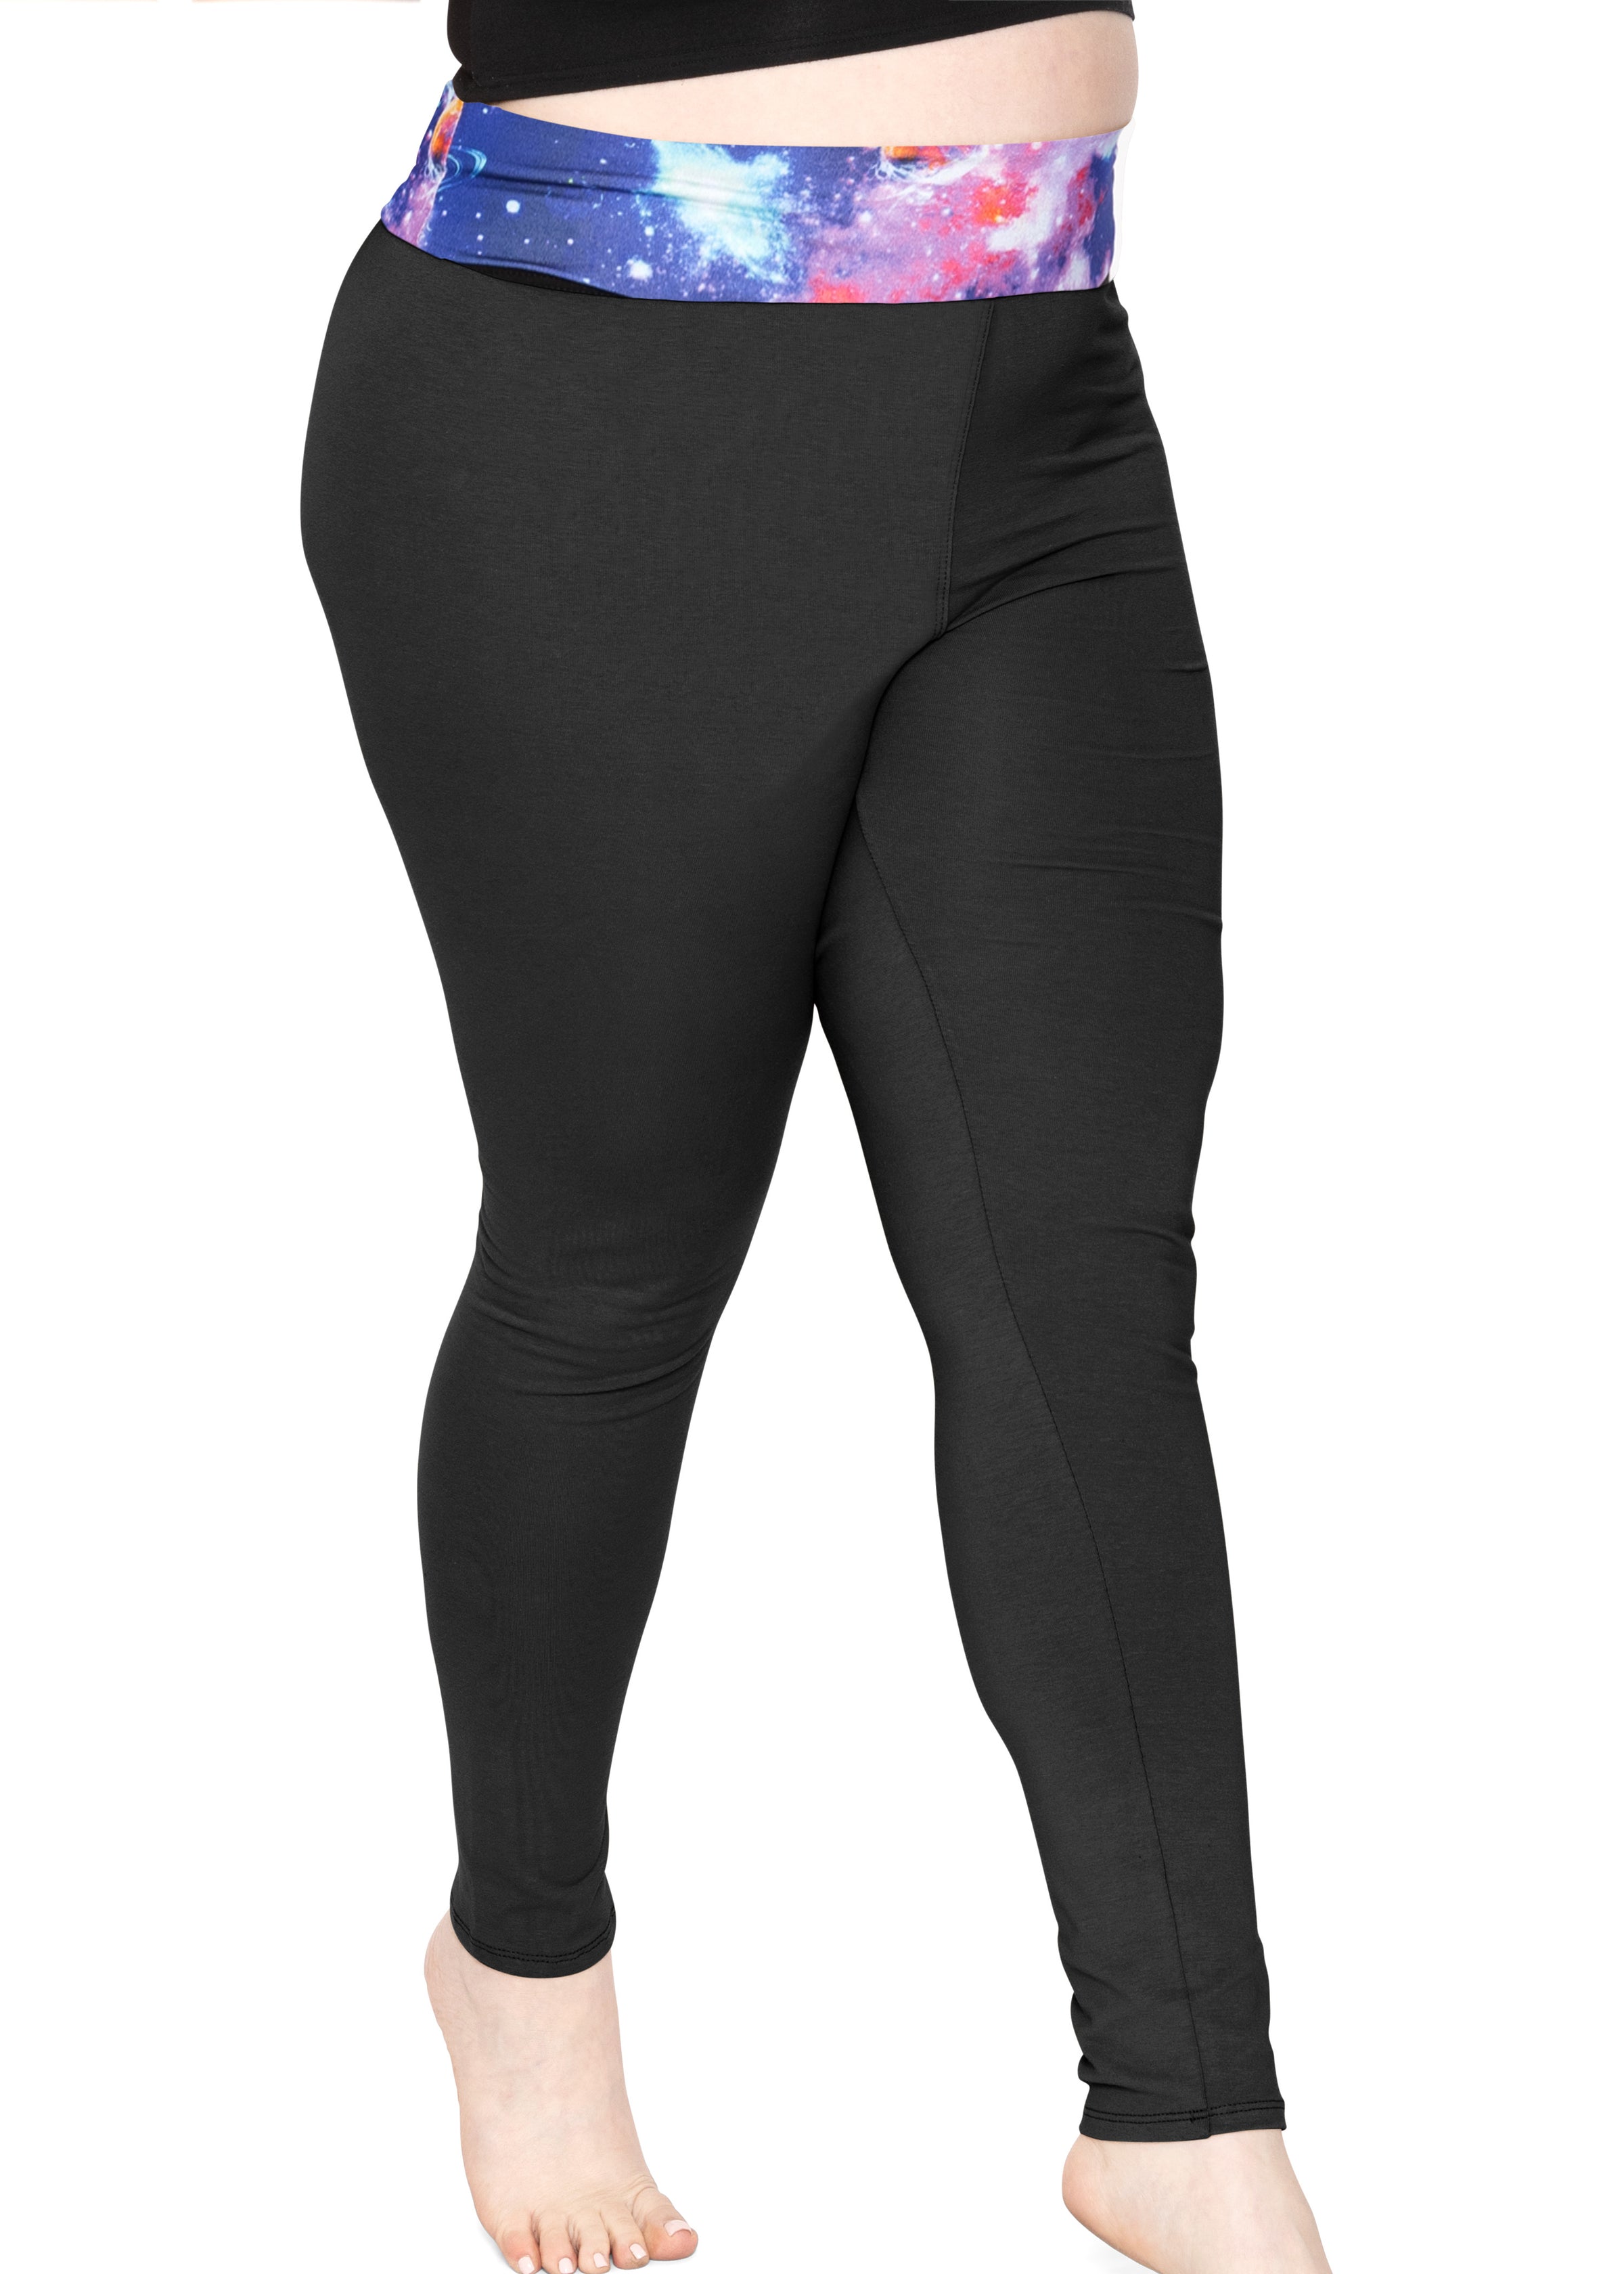 Plus Size Yoga Pants & Tights for Women.